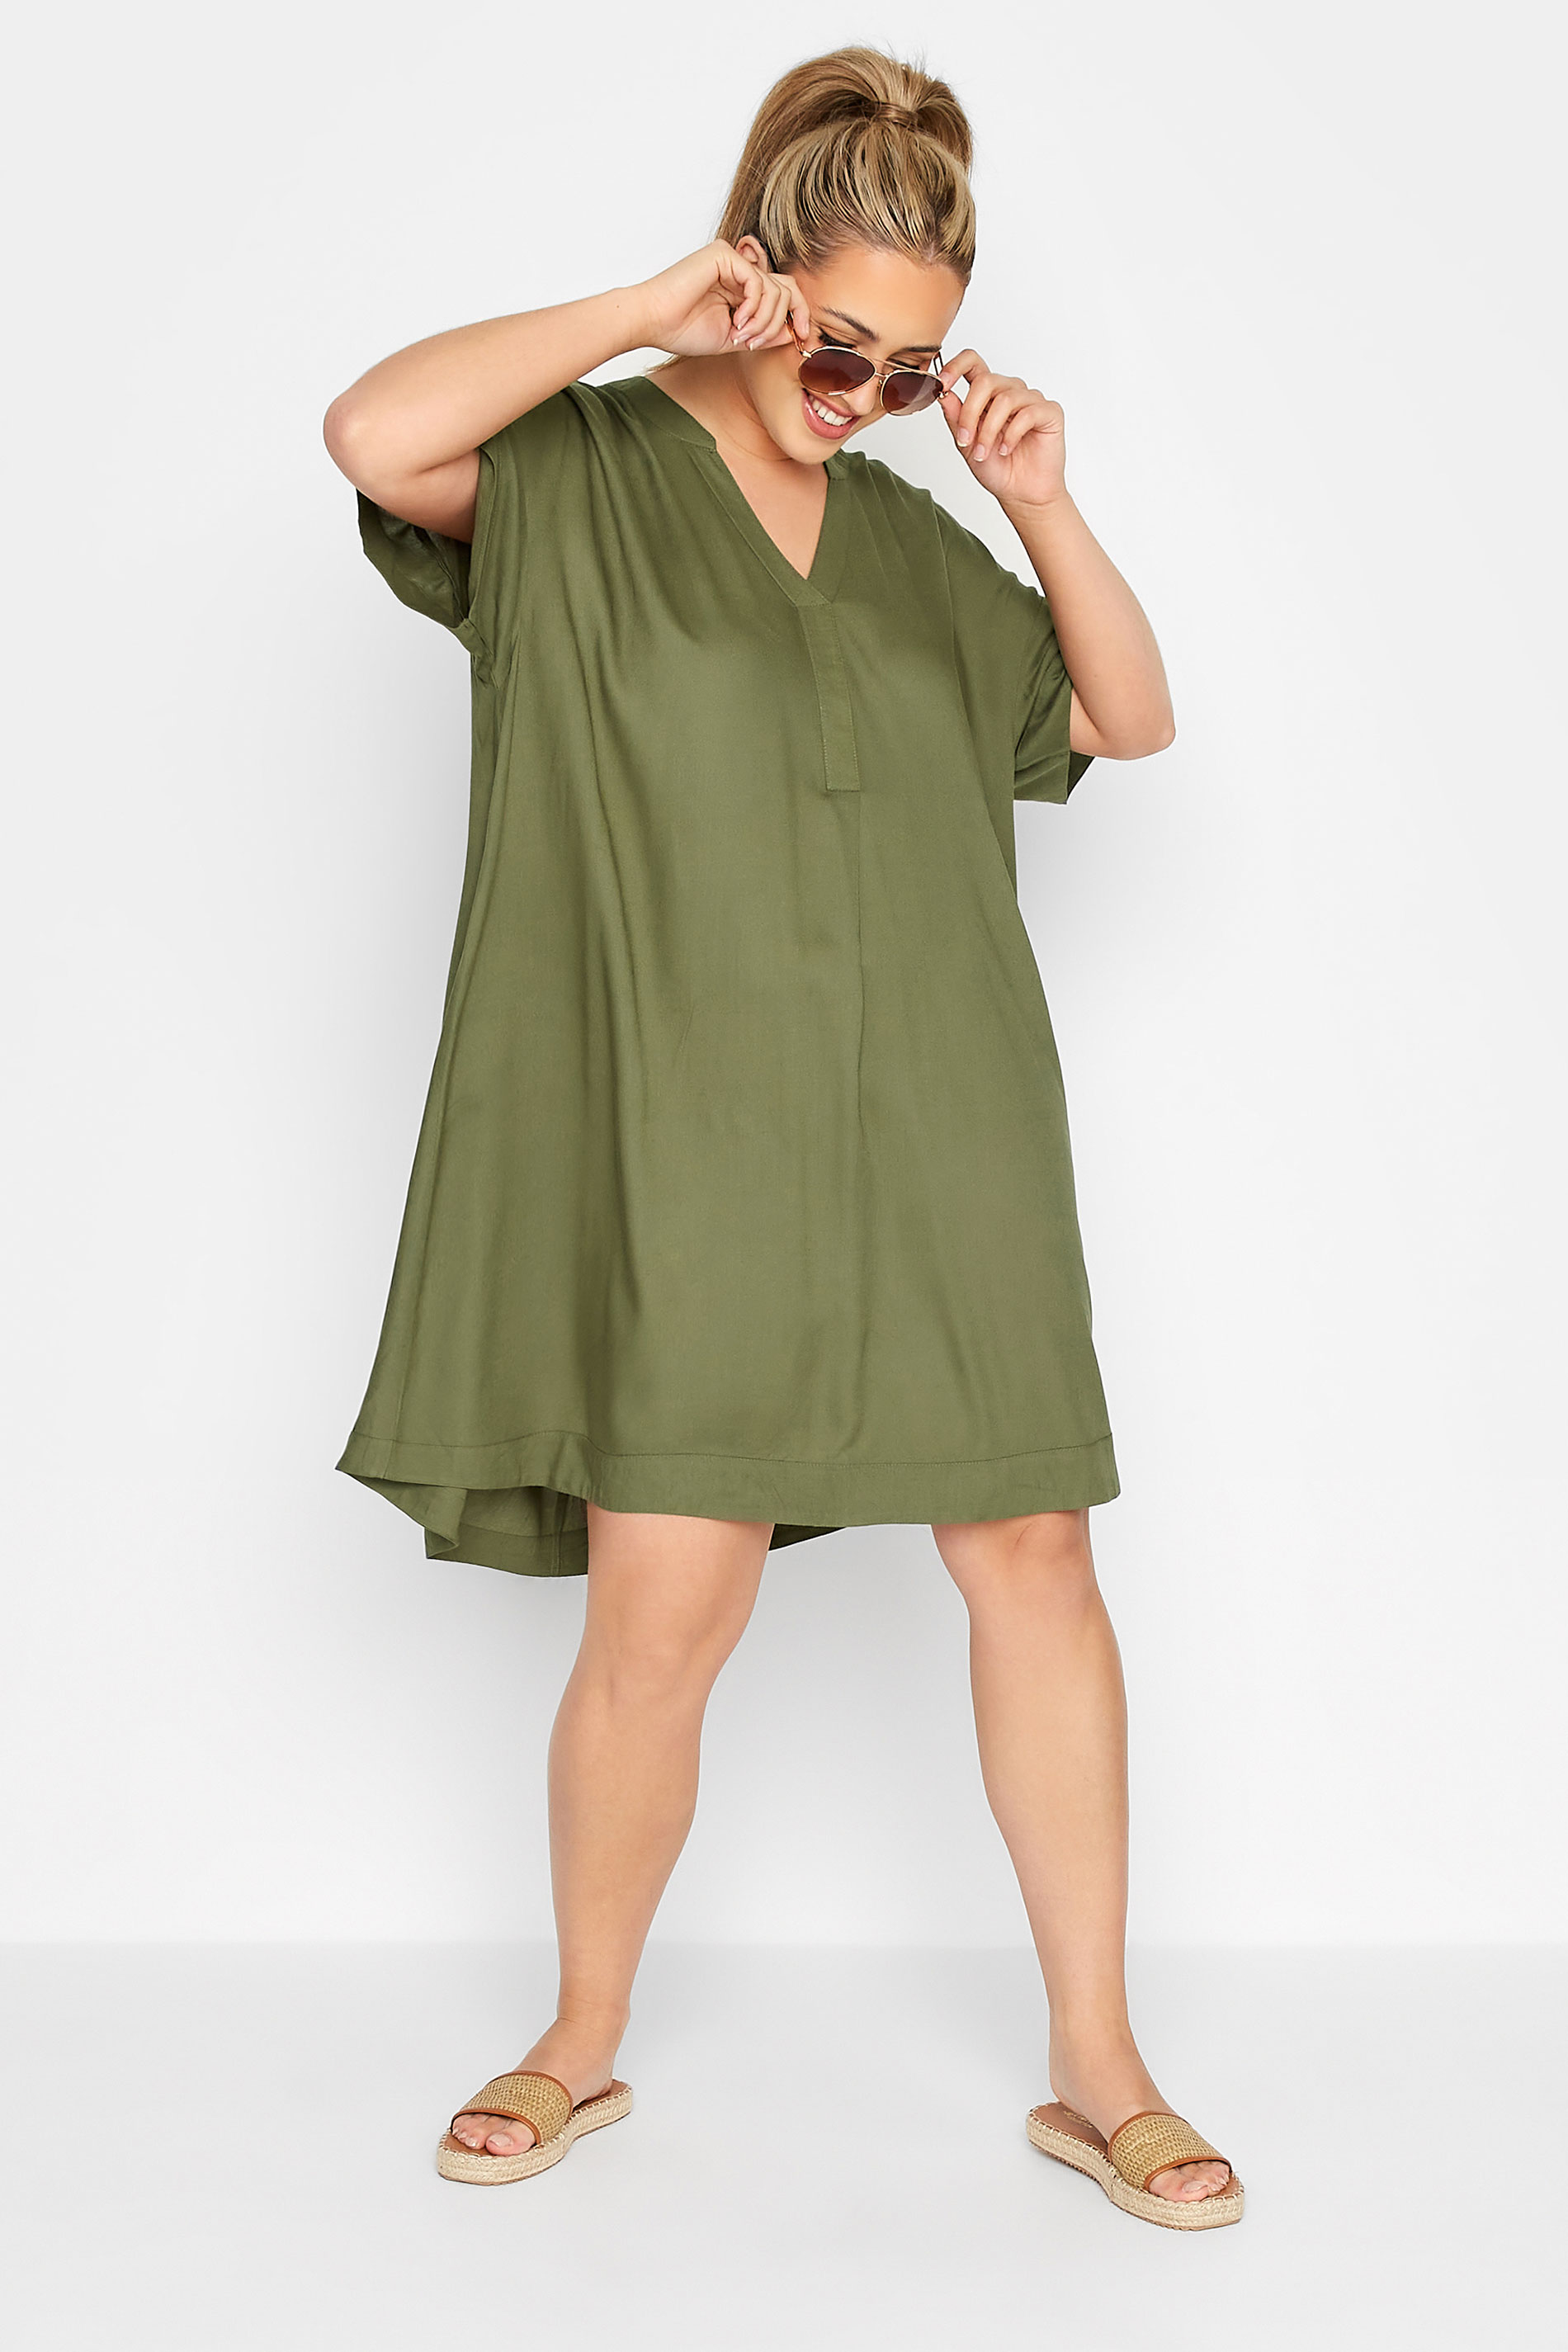 Robes Grande Taille Grande taille  Robes Casual | LIMITED COLLECTION - Robe Verte Kaki Style Chemisier - XJ03991